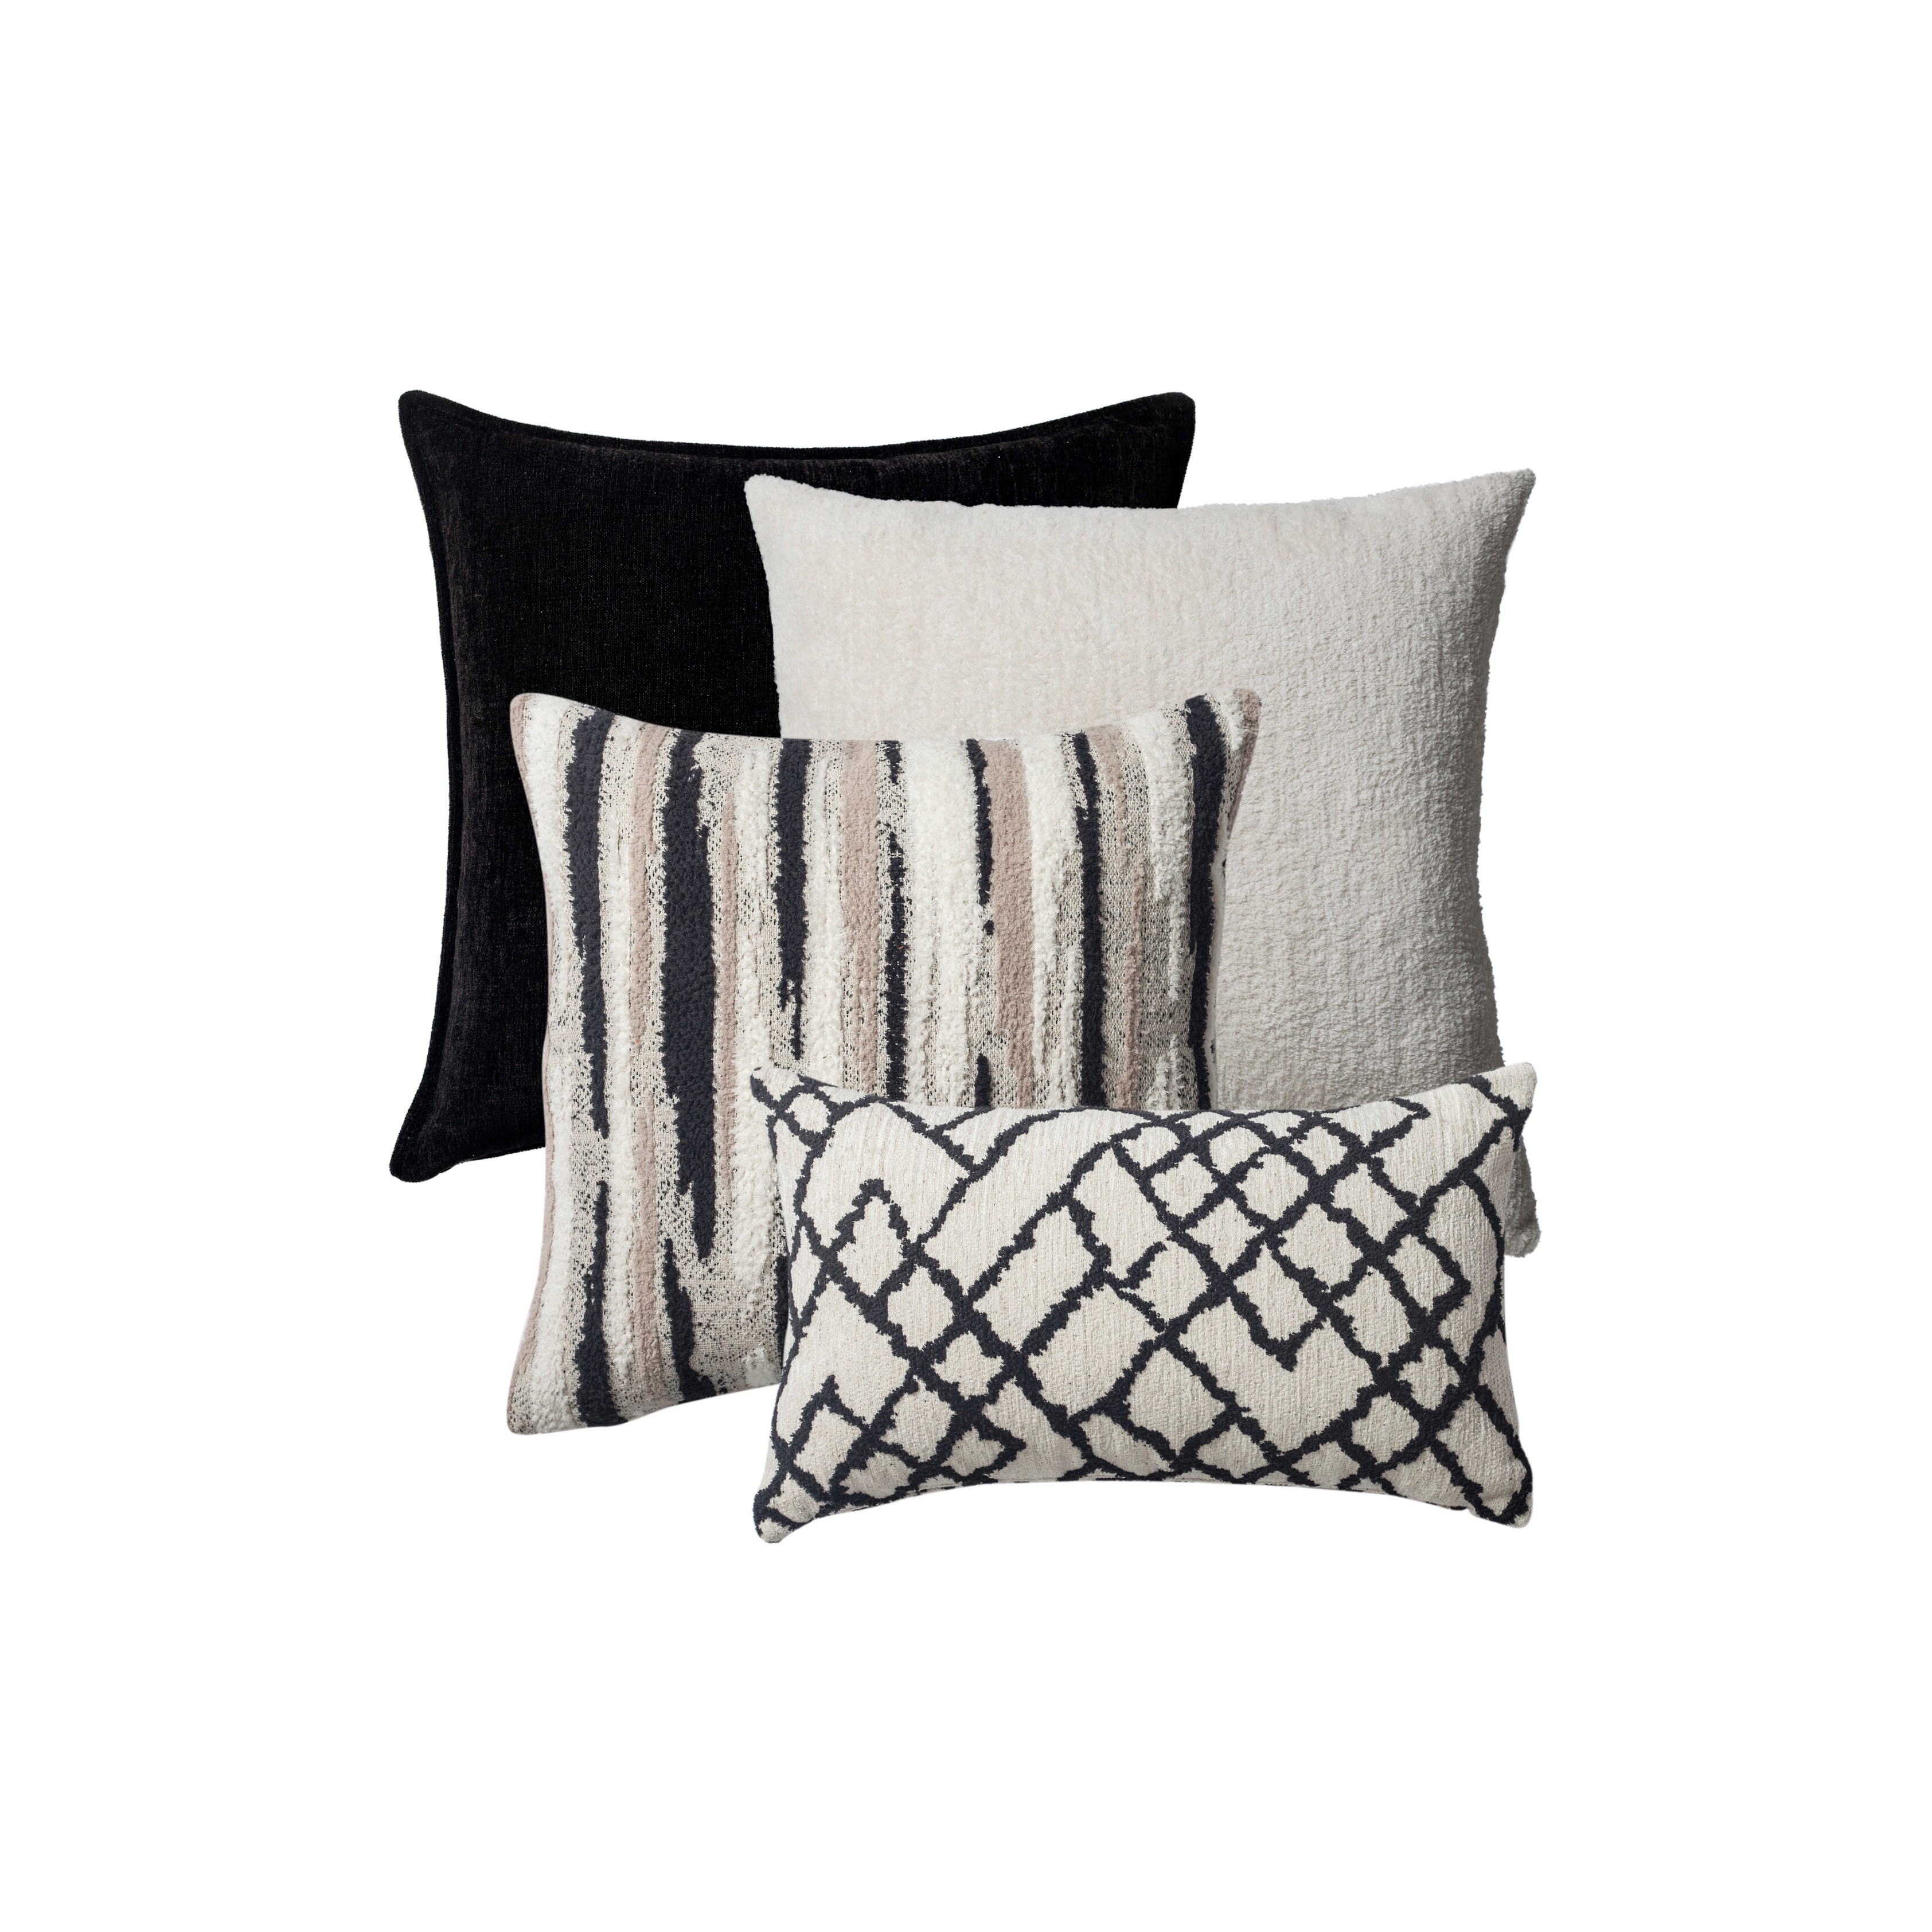 "Meis" - Decorative Pillow - 4-Piece Combo Set (Cover Only)